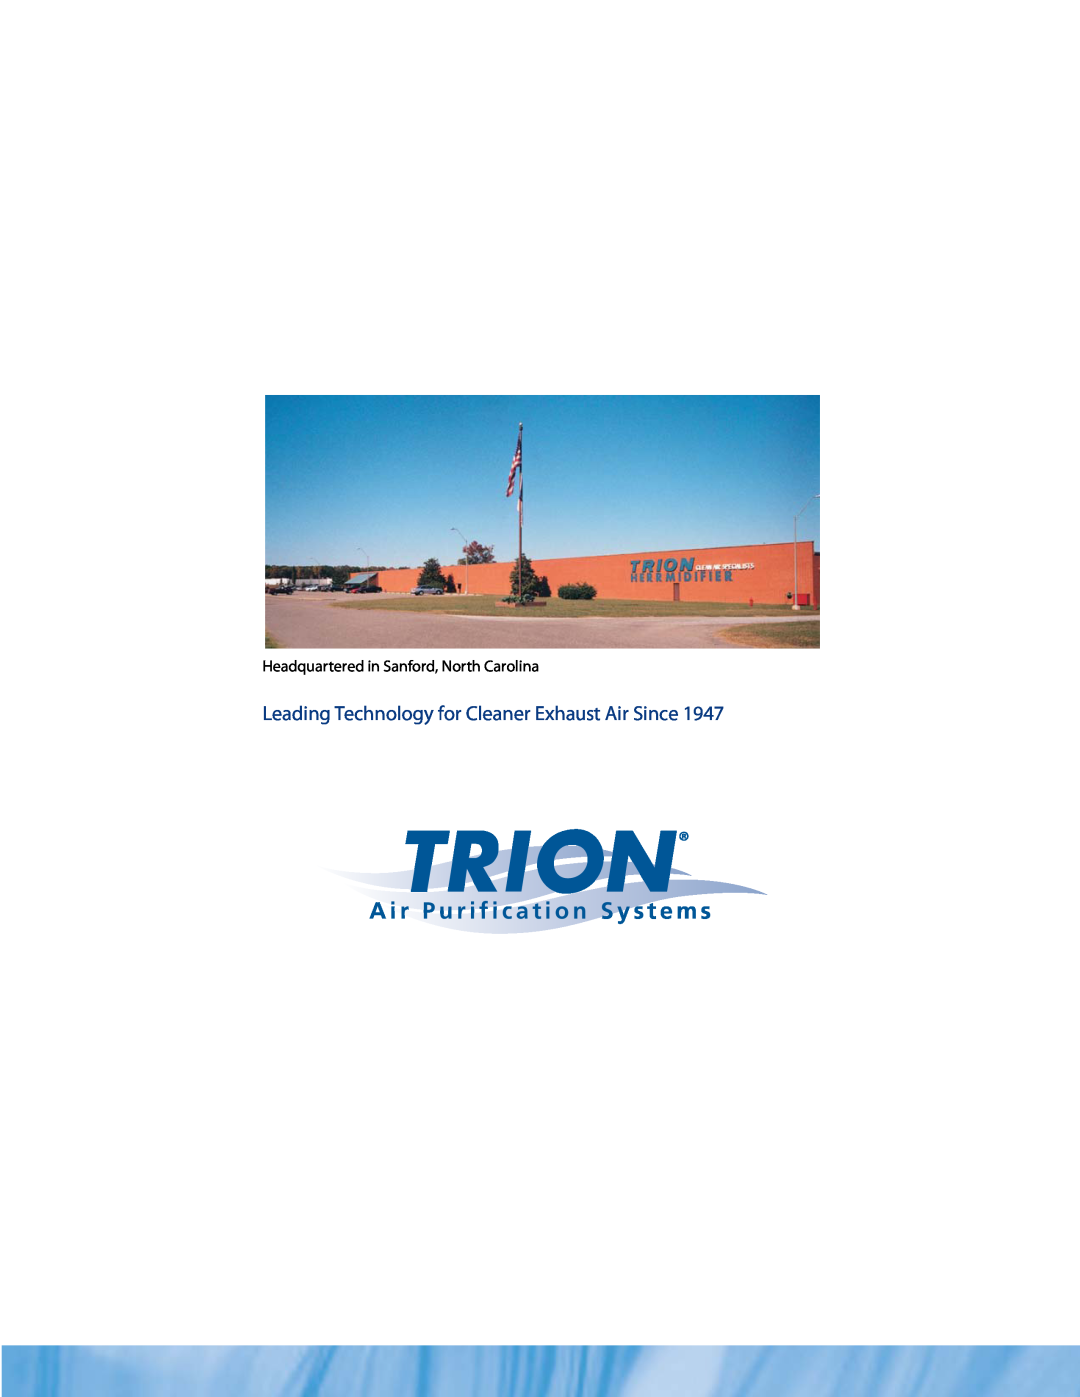 Trion DC-80, DC-96, DC-6, DC-4 A i r P u r i f i c a t i o n S y s t e m s, Leading Technology for Cleaner Exhaust Air Since 